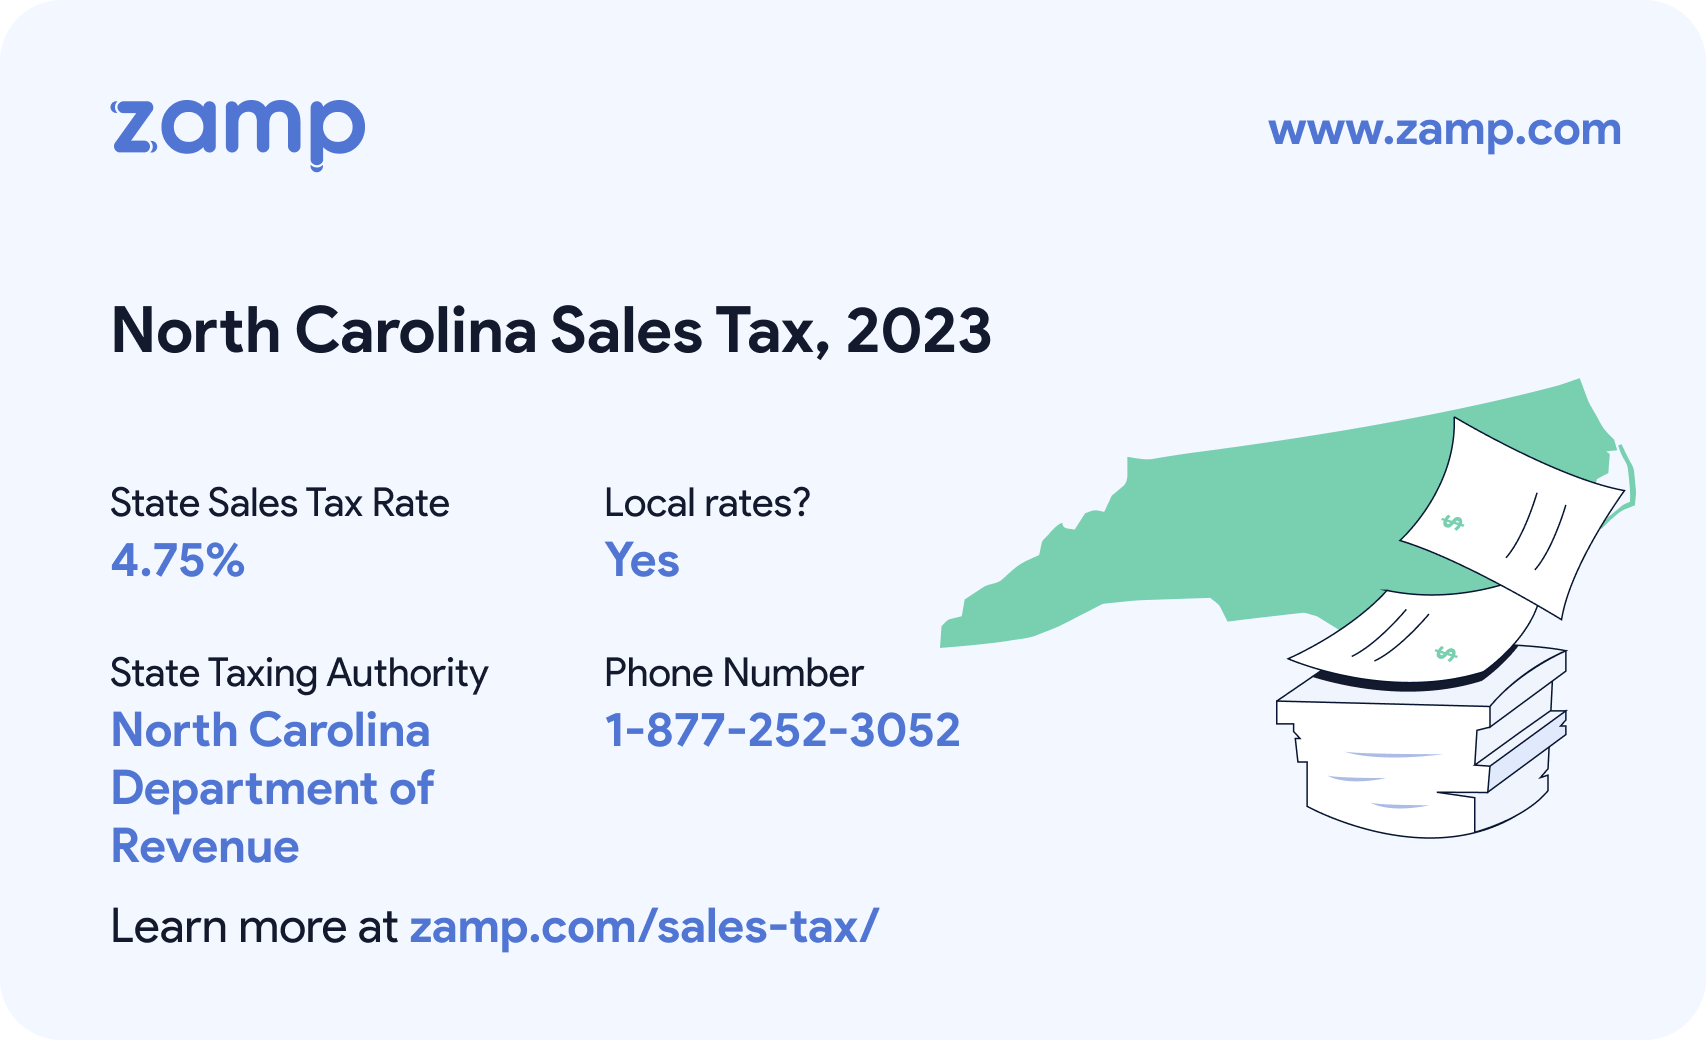 North Carolina basic sales tax info for 2023 - State sales tax rate: 4.75%, Local rates? Yes; State Taxing Authority: North Carolina Department of Revenue; and phone number 1-877-252-3052